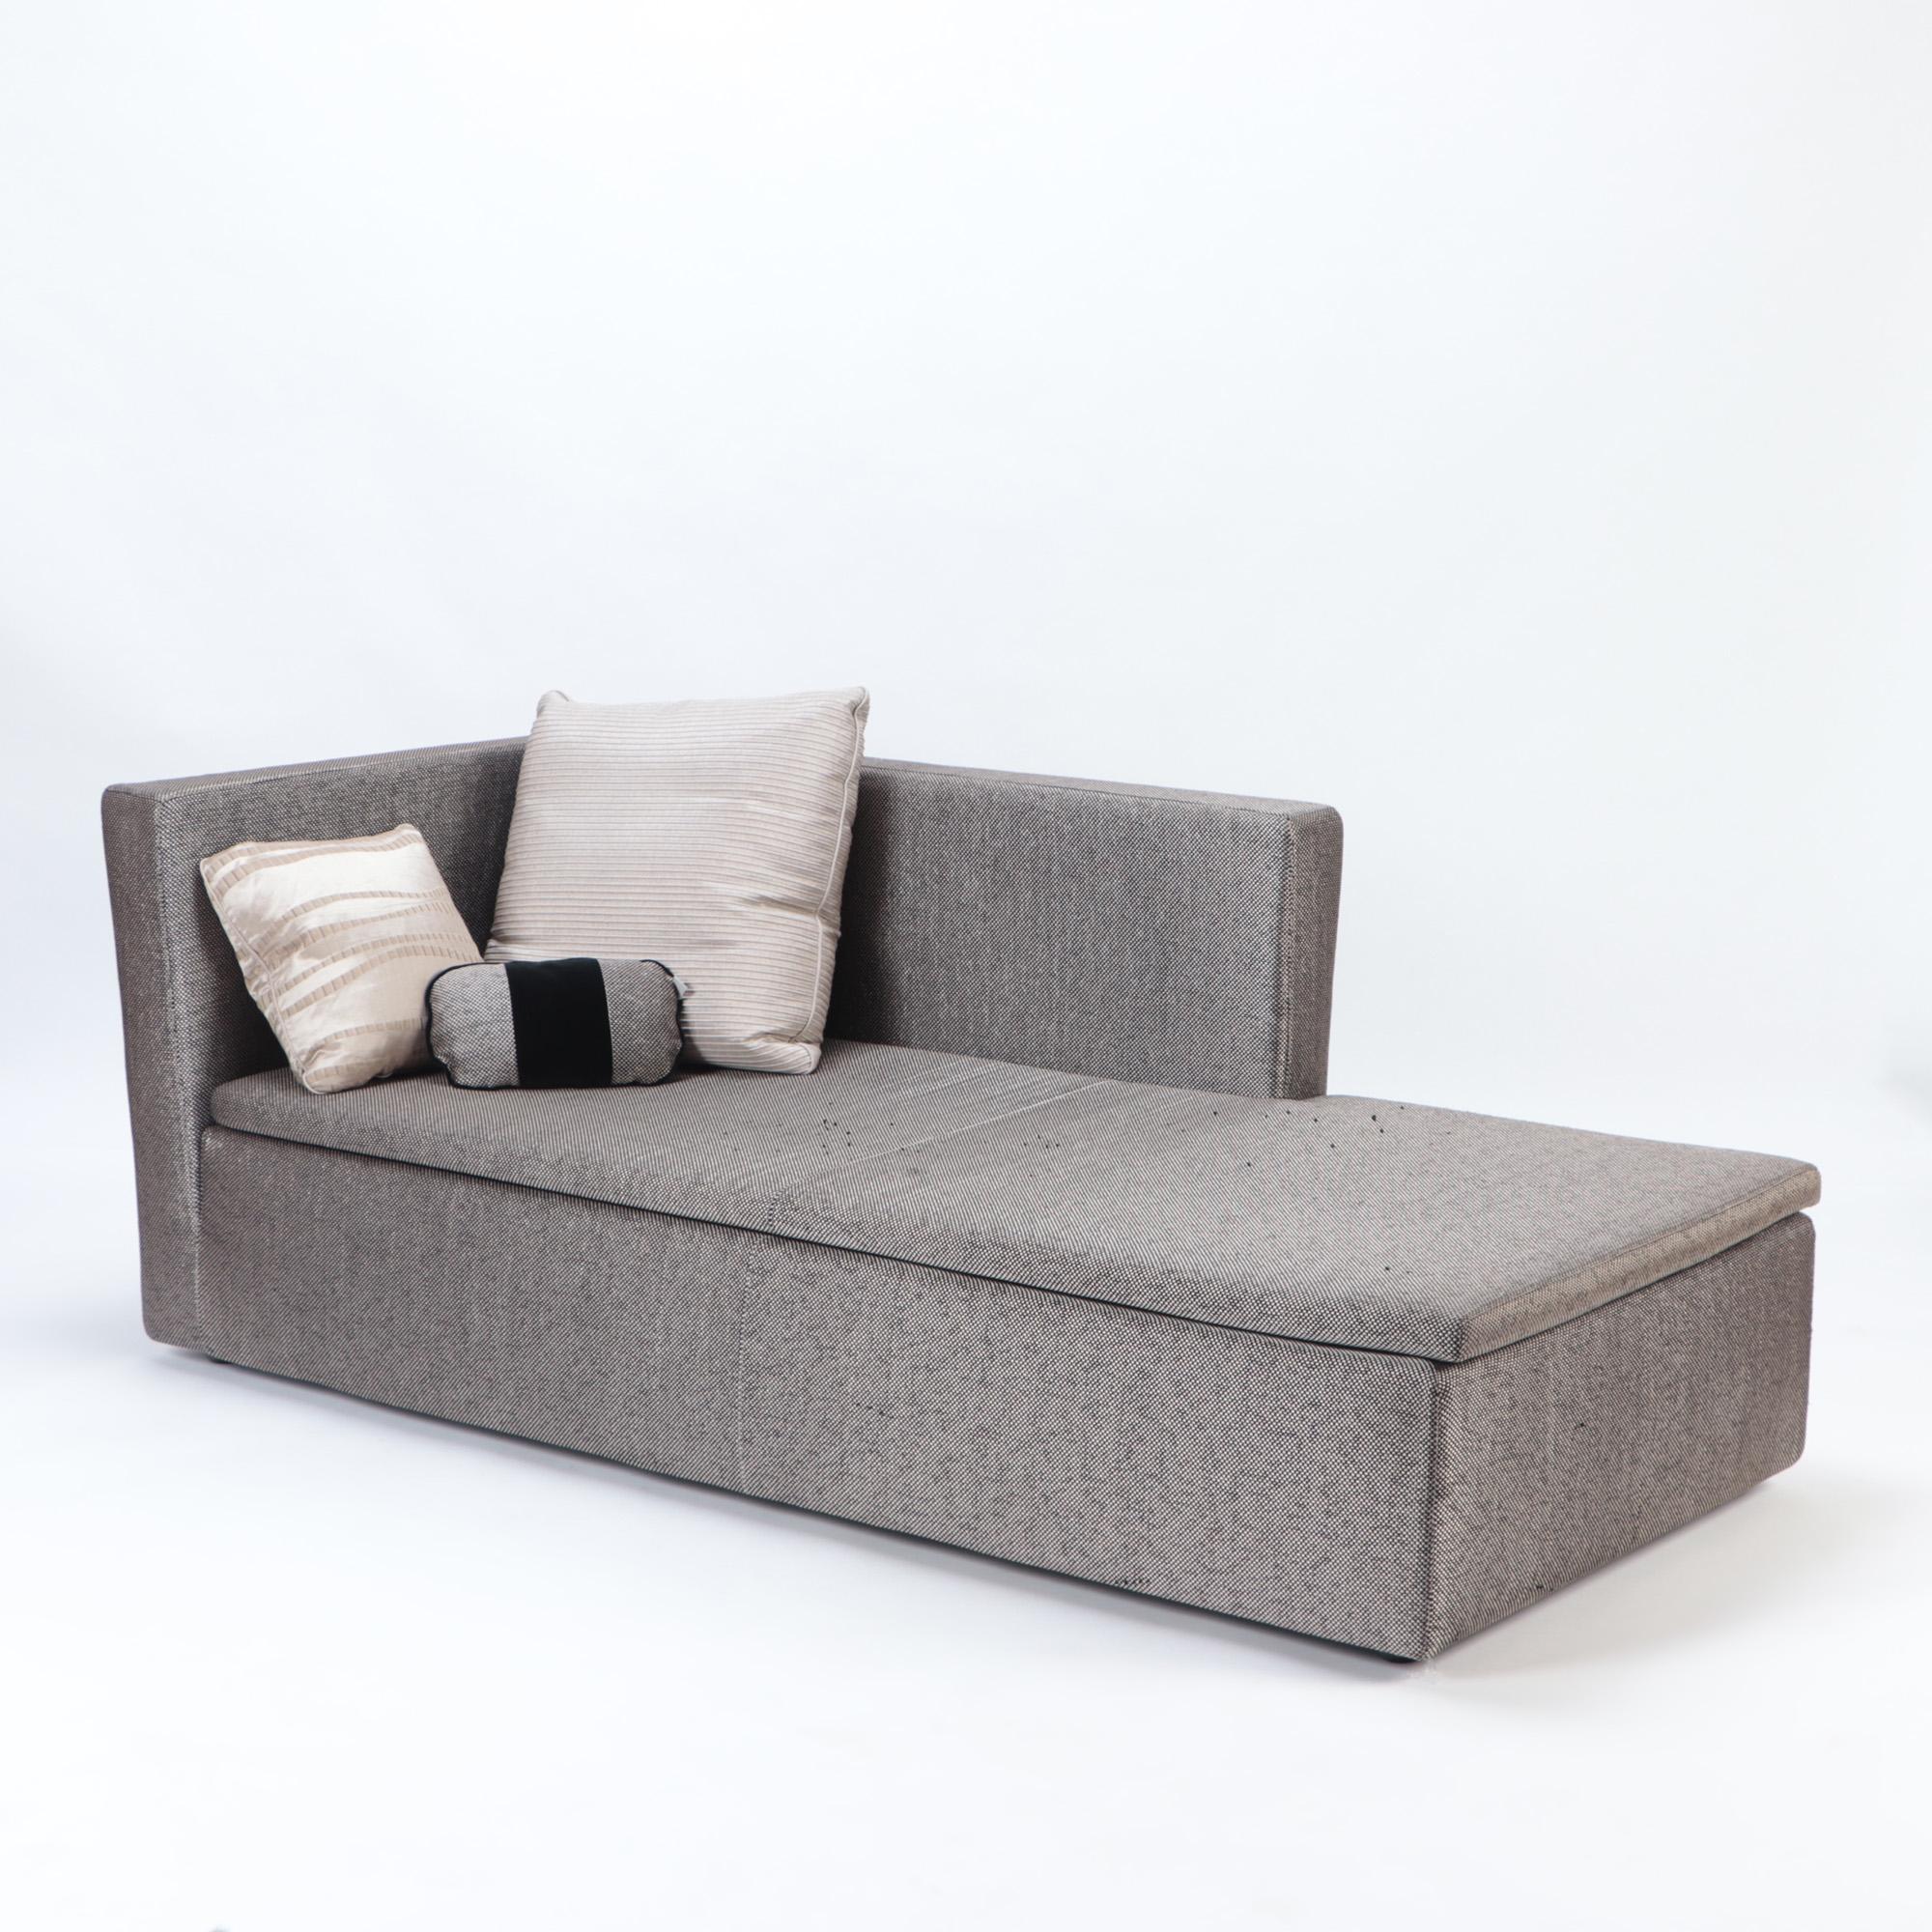 Contemporary Oversized Sofa, Armani Casa. Could be a day bed as well. Excellent condition.